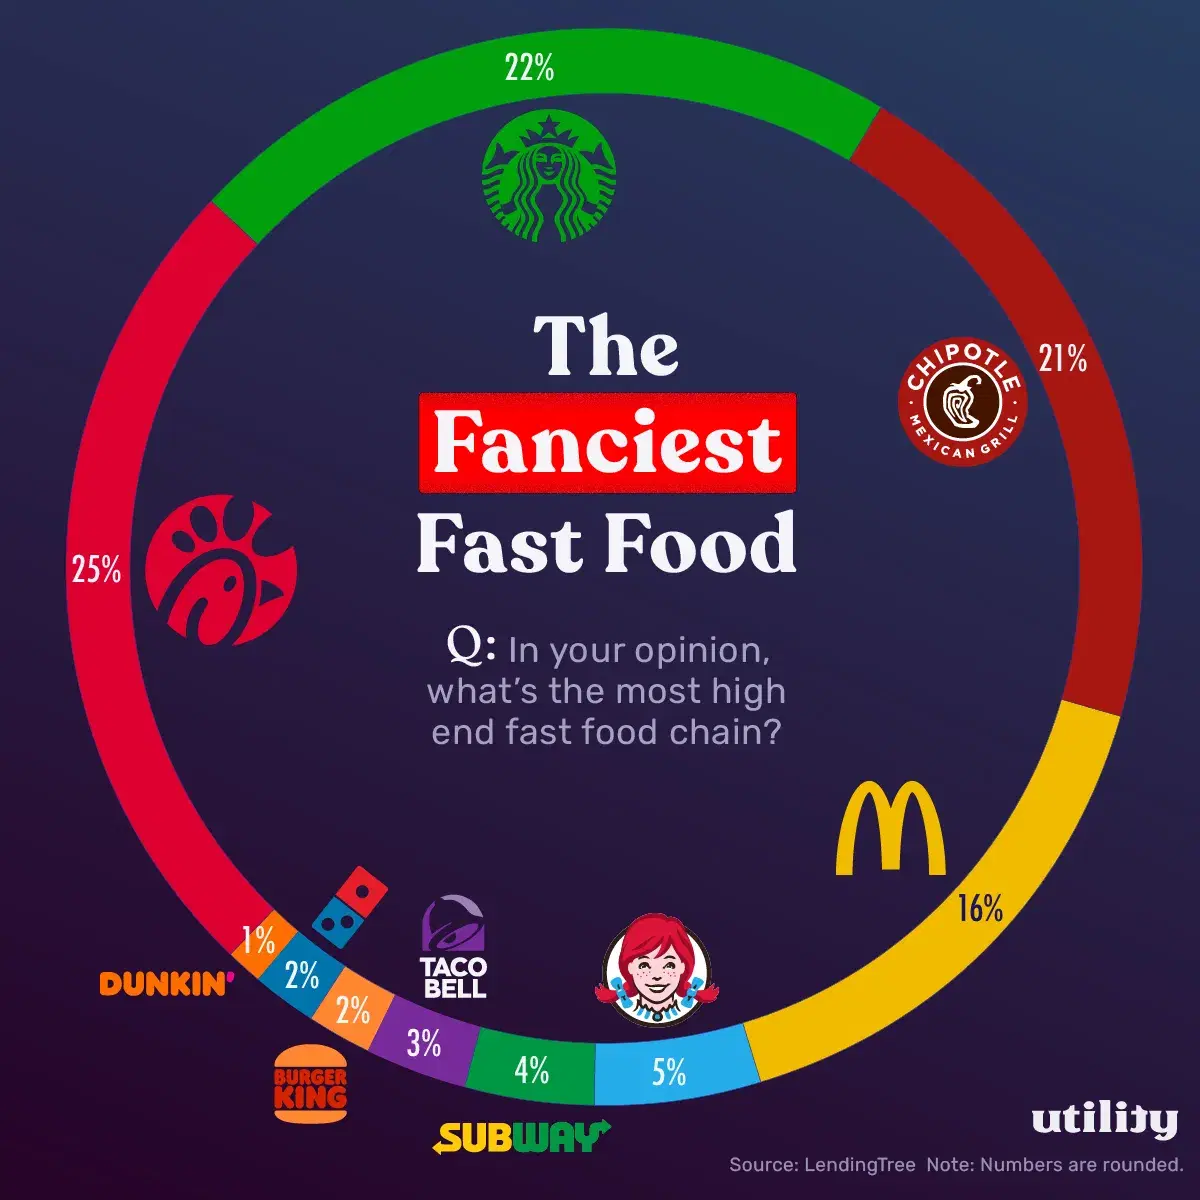 The Most High-End Fast Food Chain According to Americans